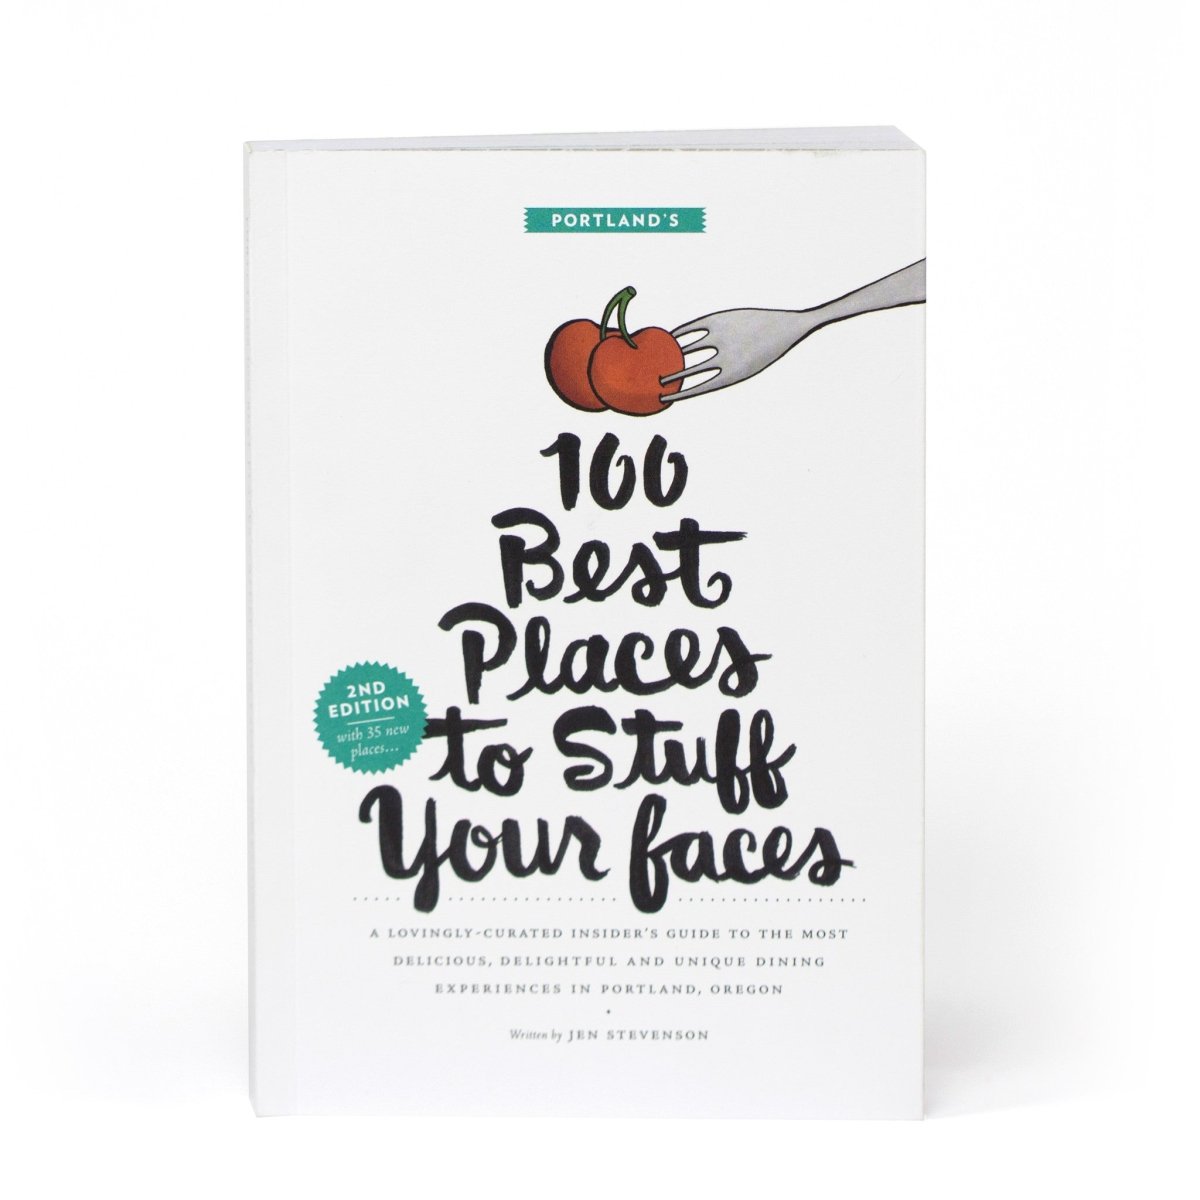 100 Best Places to Stuff Your Faces guidebook